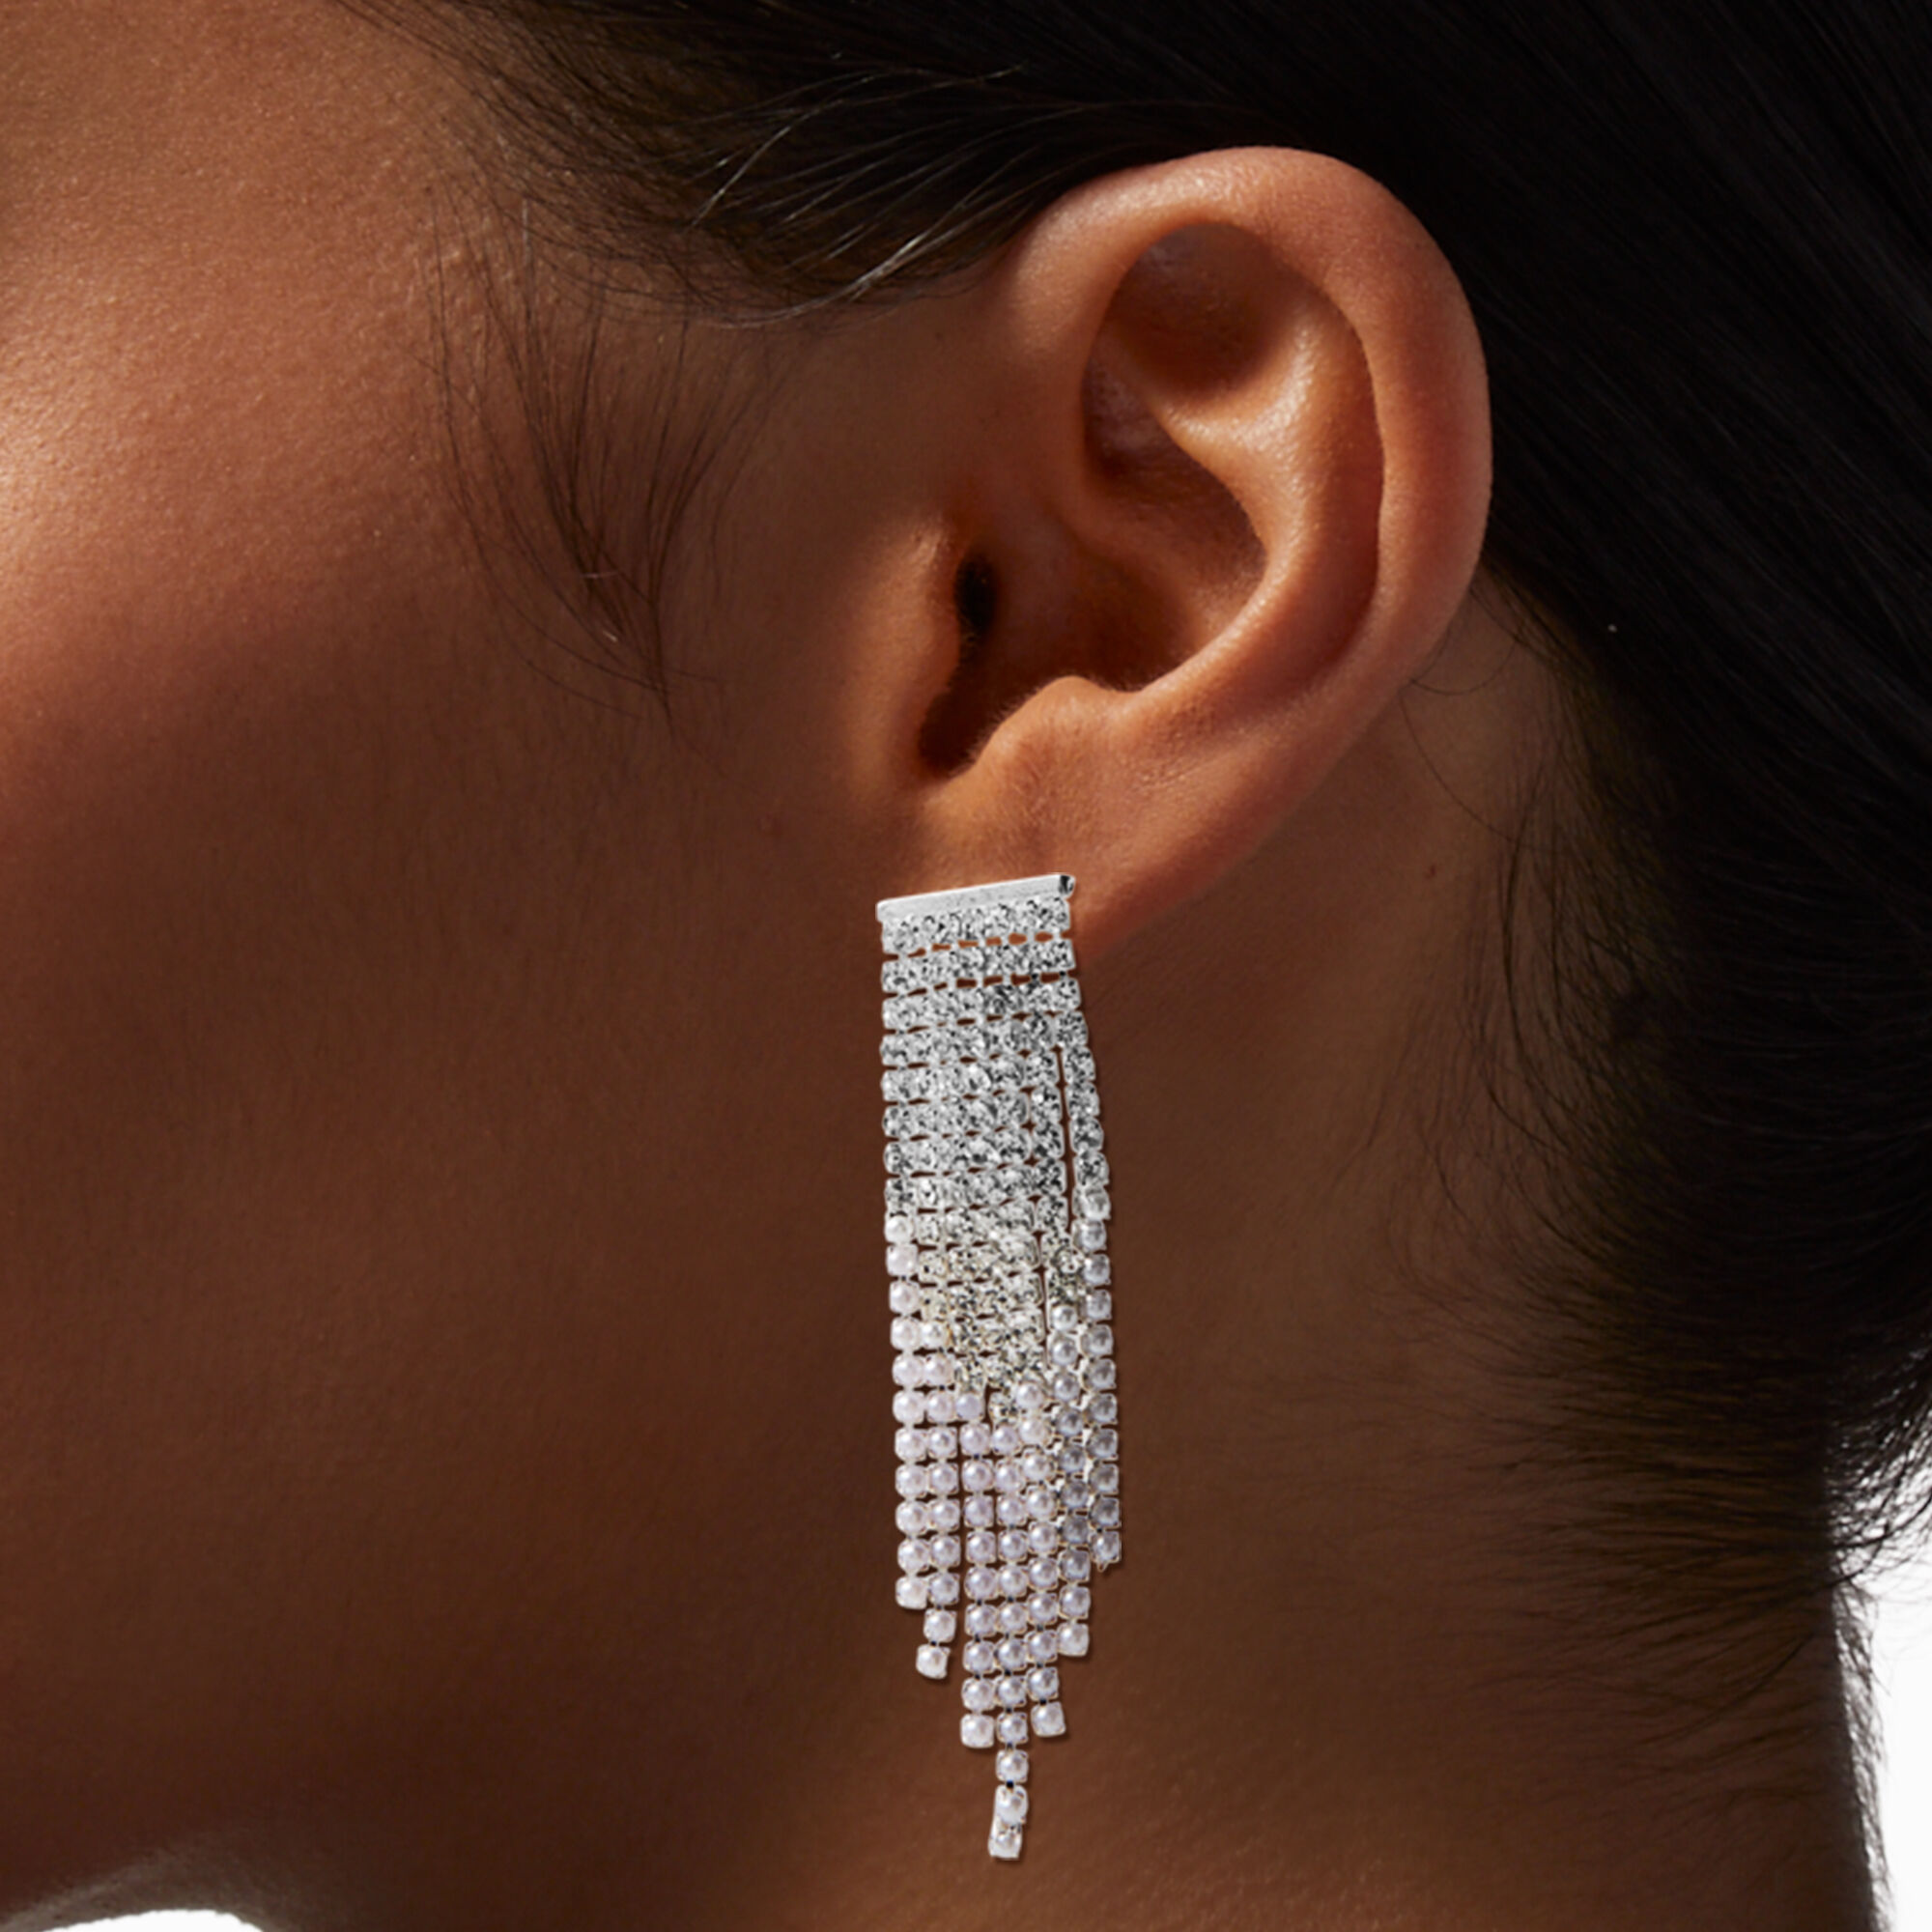 Diamante Earrings | Shine Bright Like A Star With